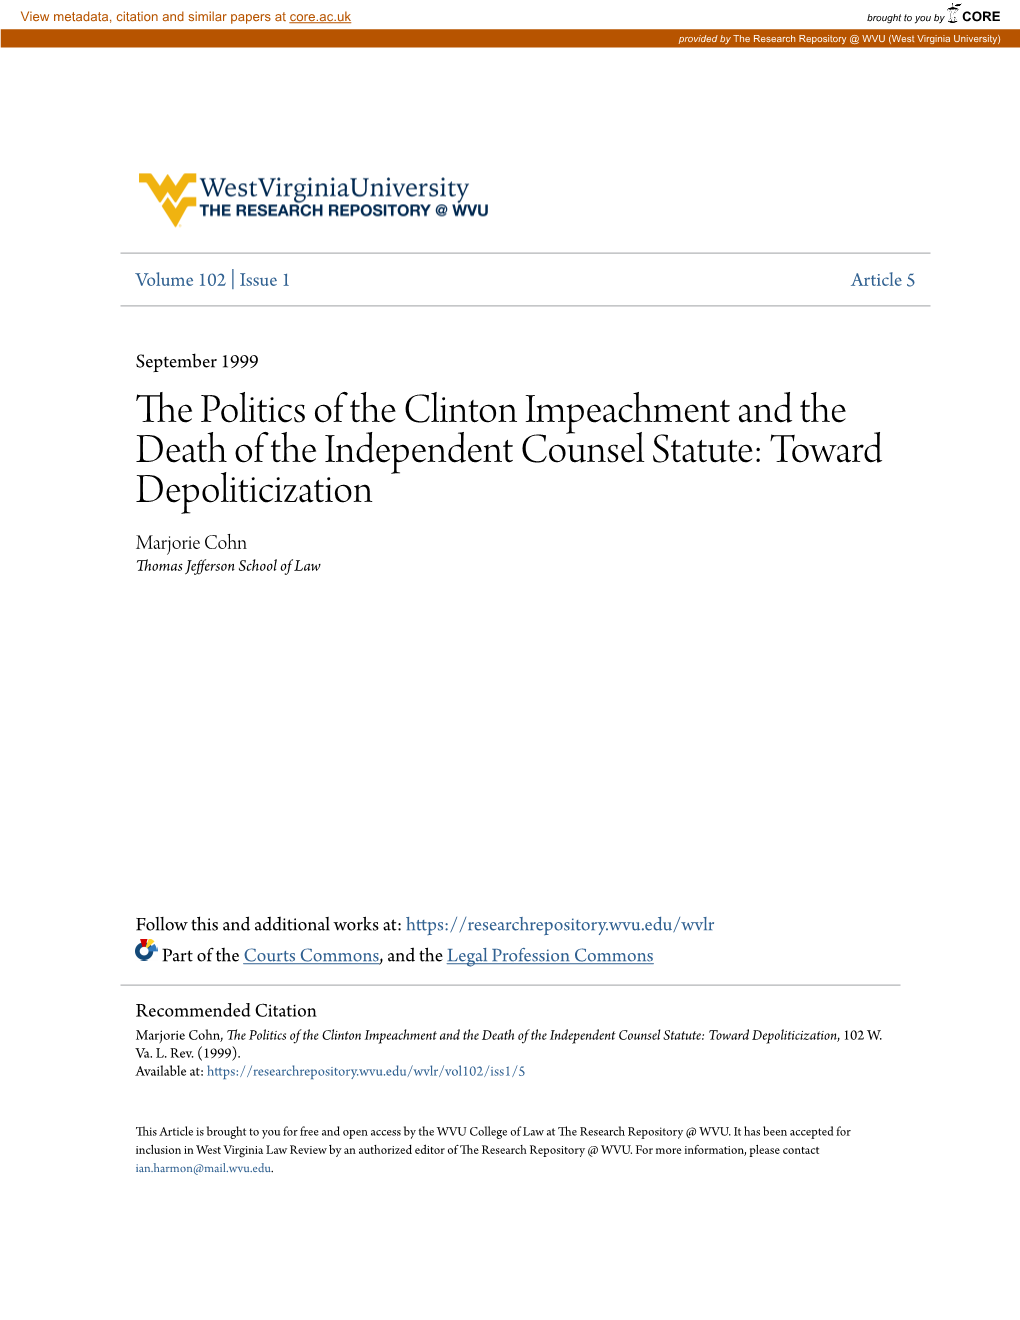 The Politics of the Clinton Impeachment and the Death of the Independent Counsel Statute: Toward Depoliticization, 102 W